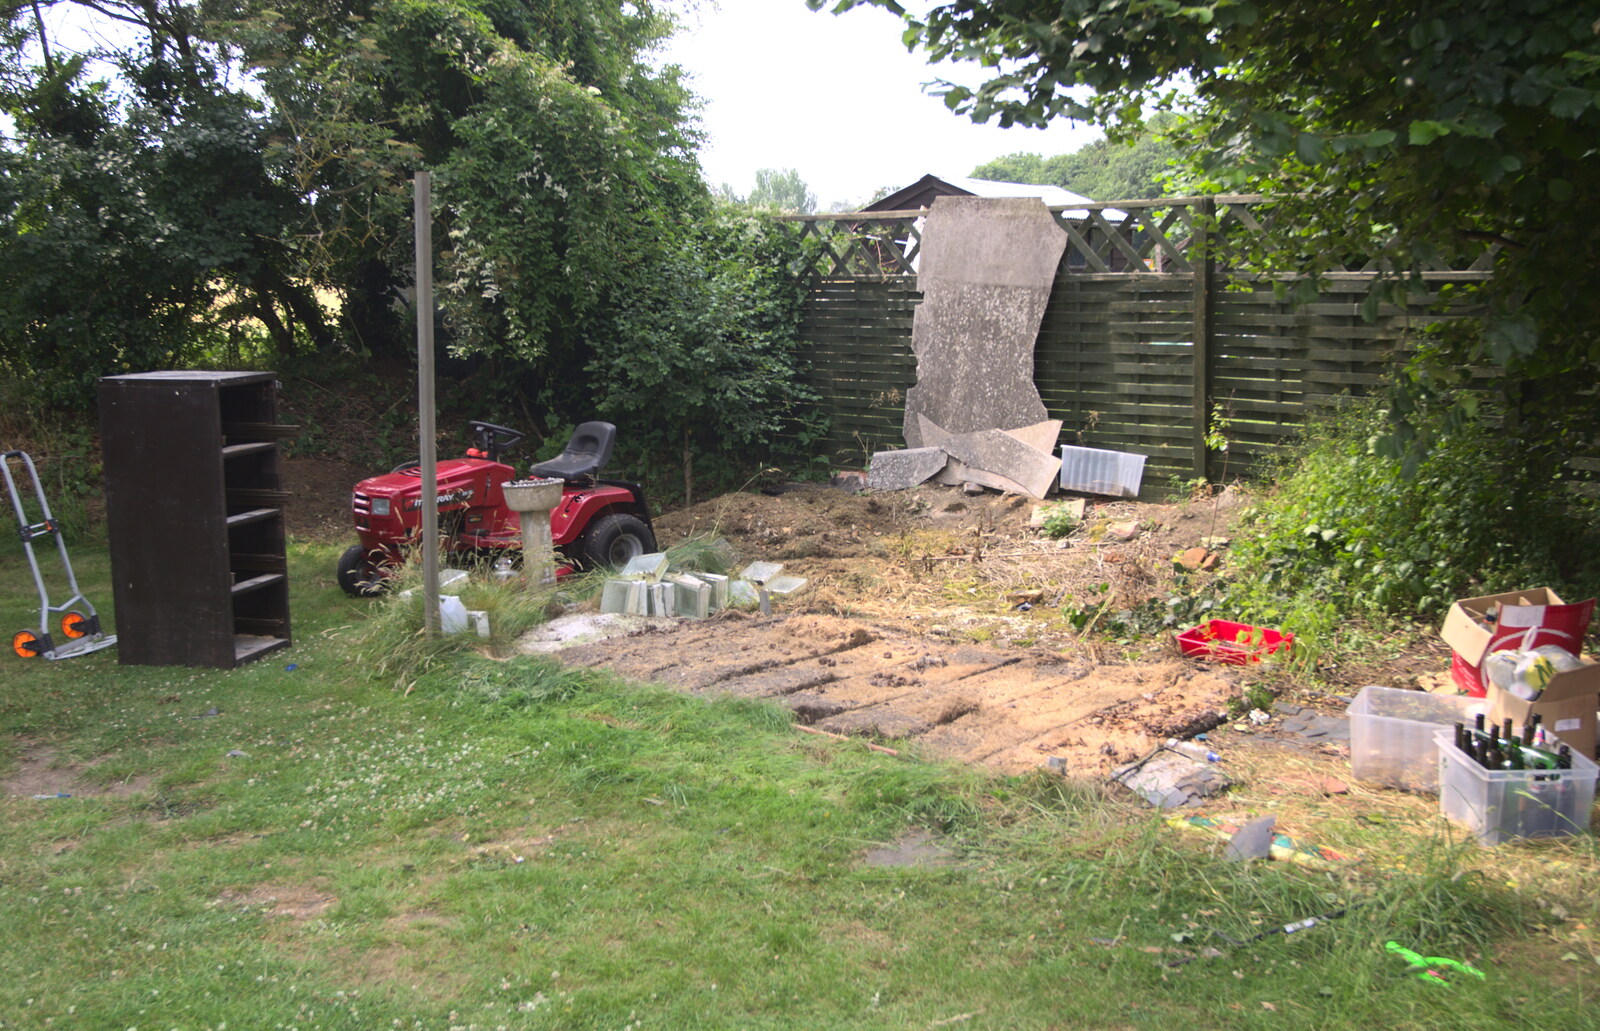 The space where the shed used to be from The BSCC at Pulham Crown, and Grandad with a Grinder, Brome, Suffolk - 11th July 2013